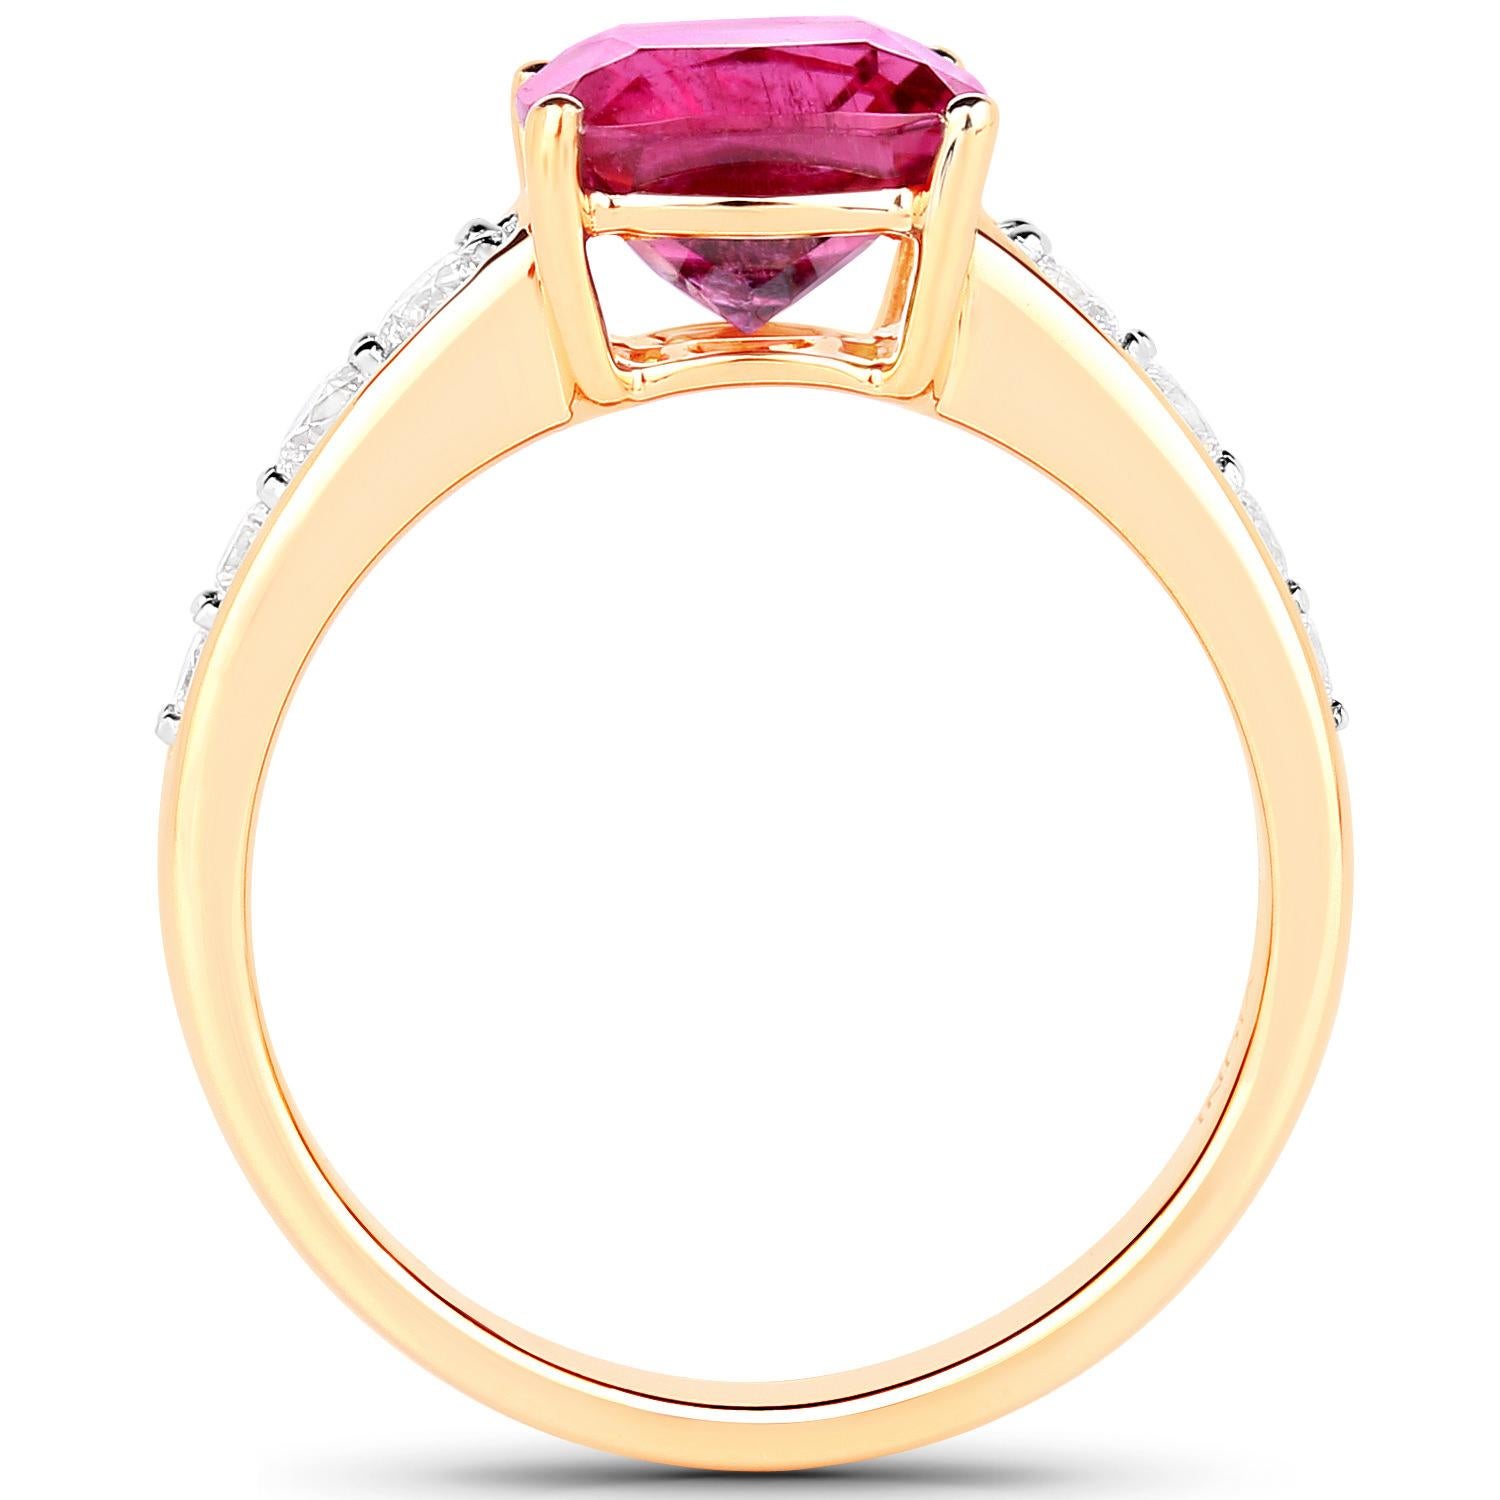 Rubellite Cocktail Ring Diamond Setting 2.7 Carats 14K Yellow Gold In Excellent Condition For Sale In Laguna Niguel, CA